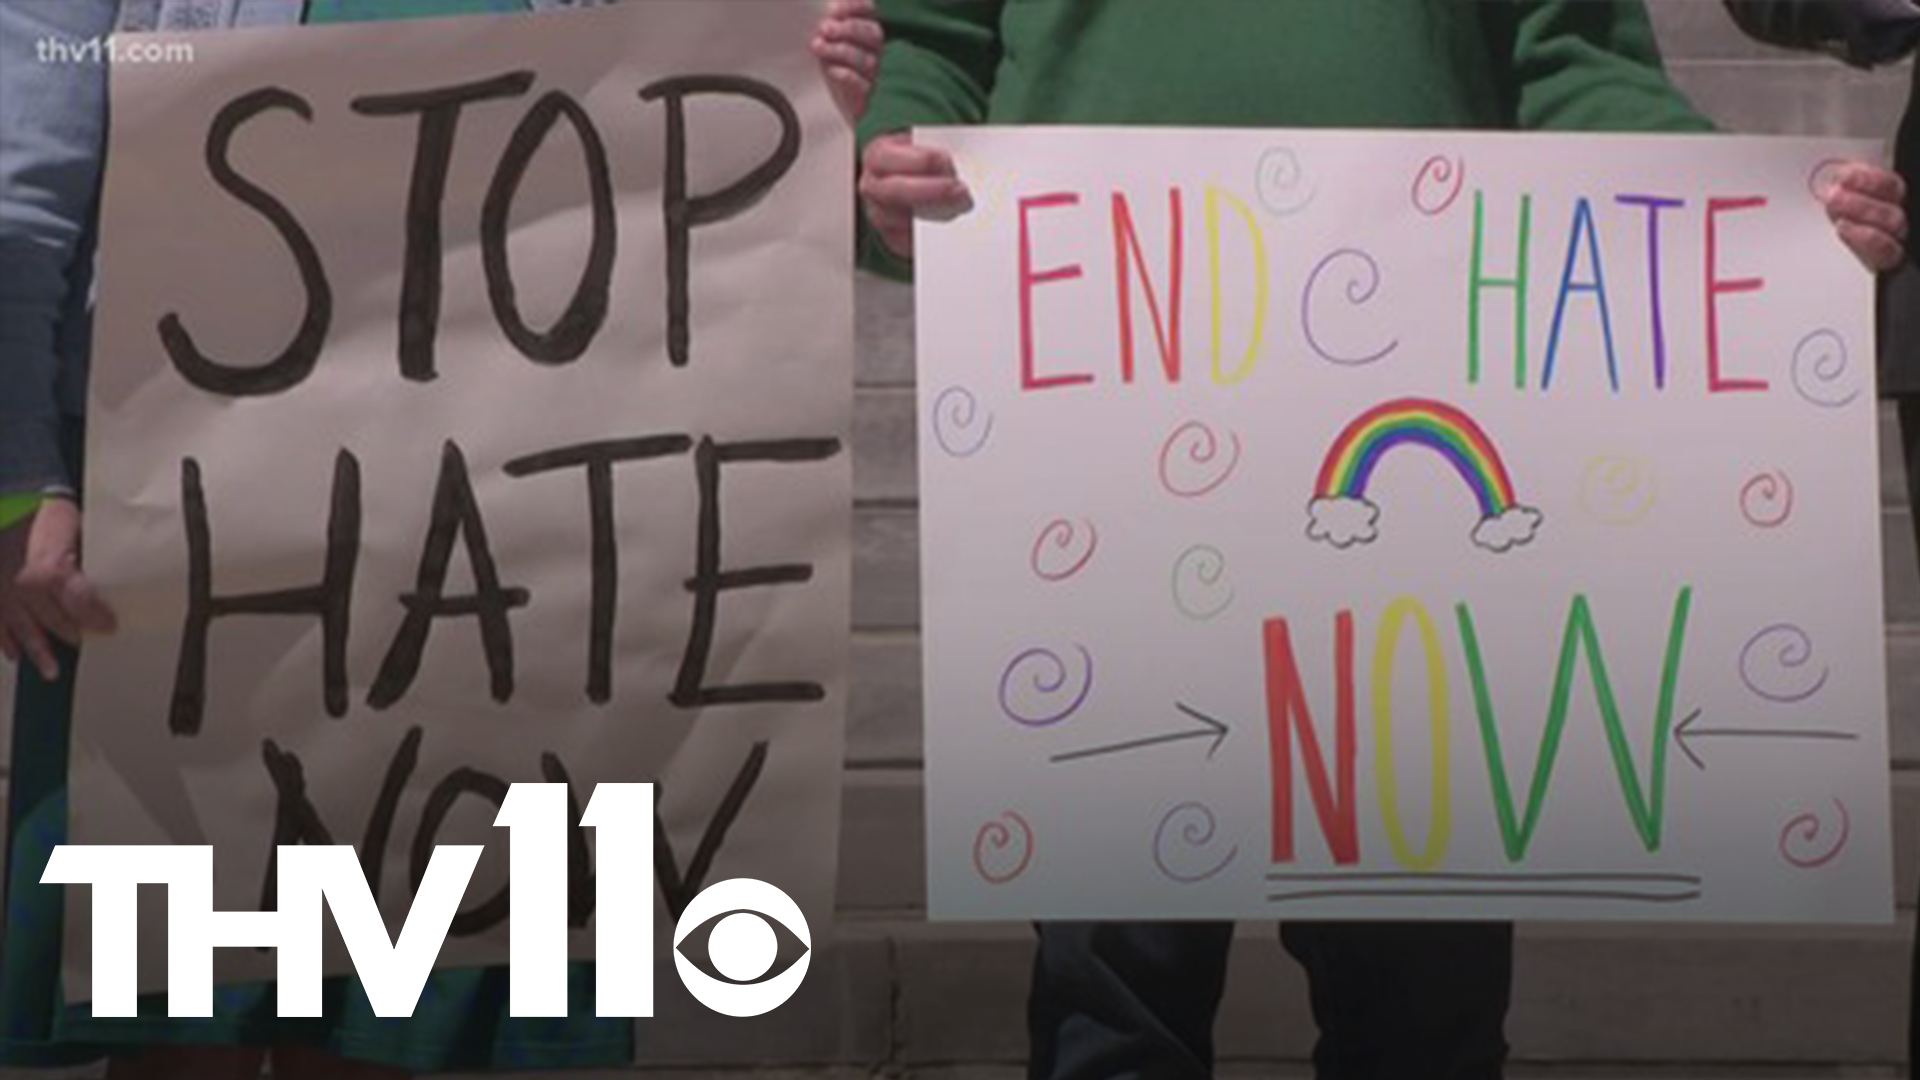 Several advocacy groups gathered at the state Capitol to launch a new campaign aimed at passing hate crime legislation.